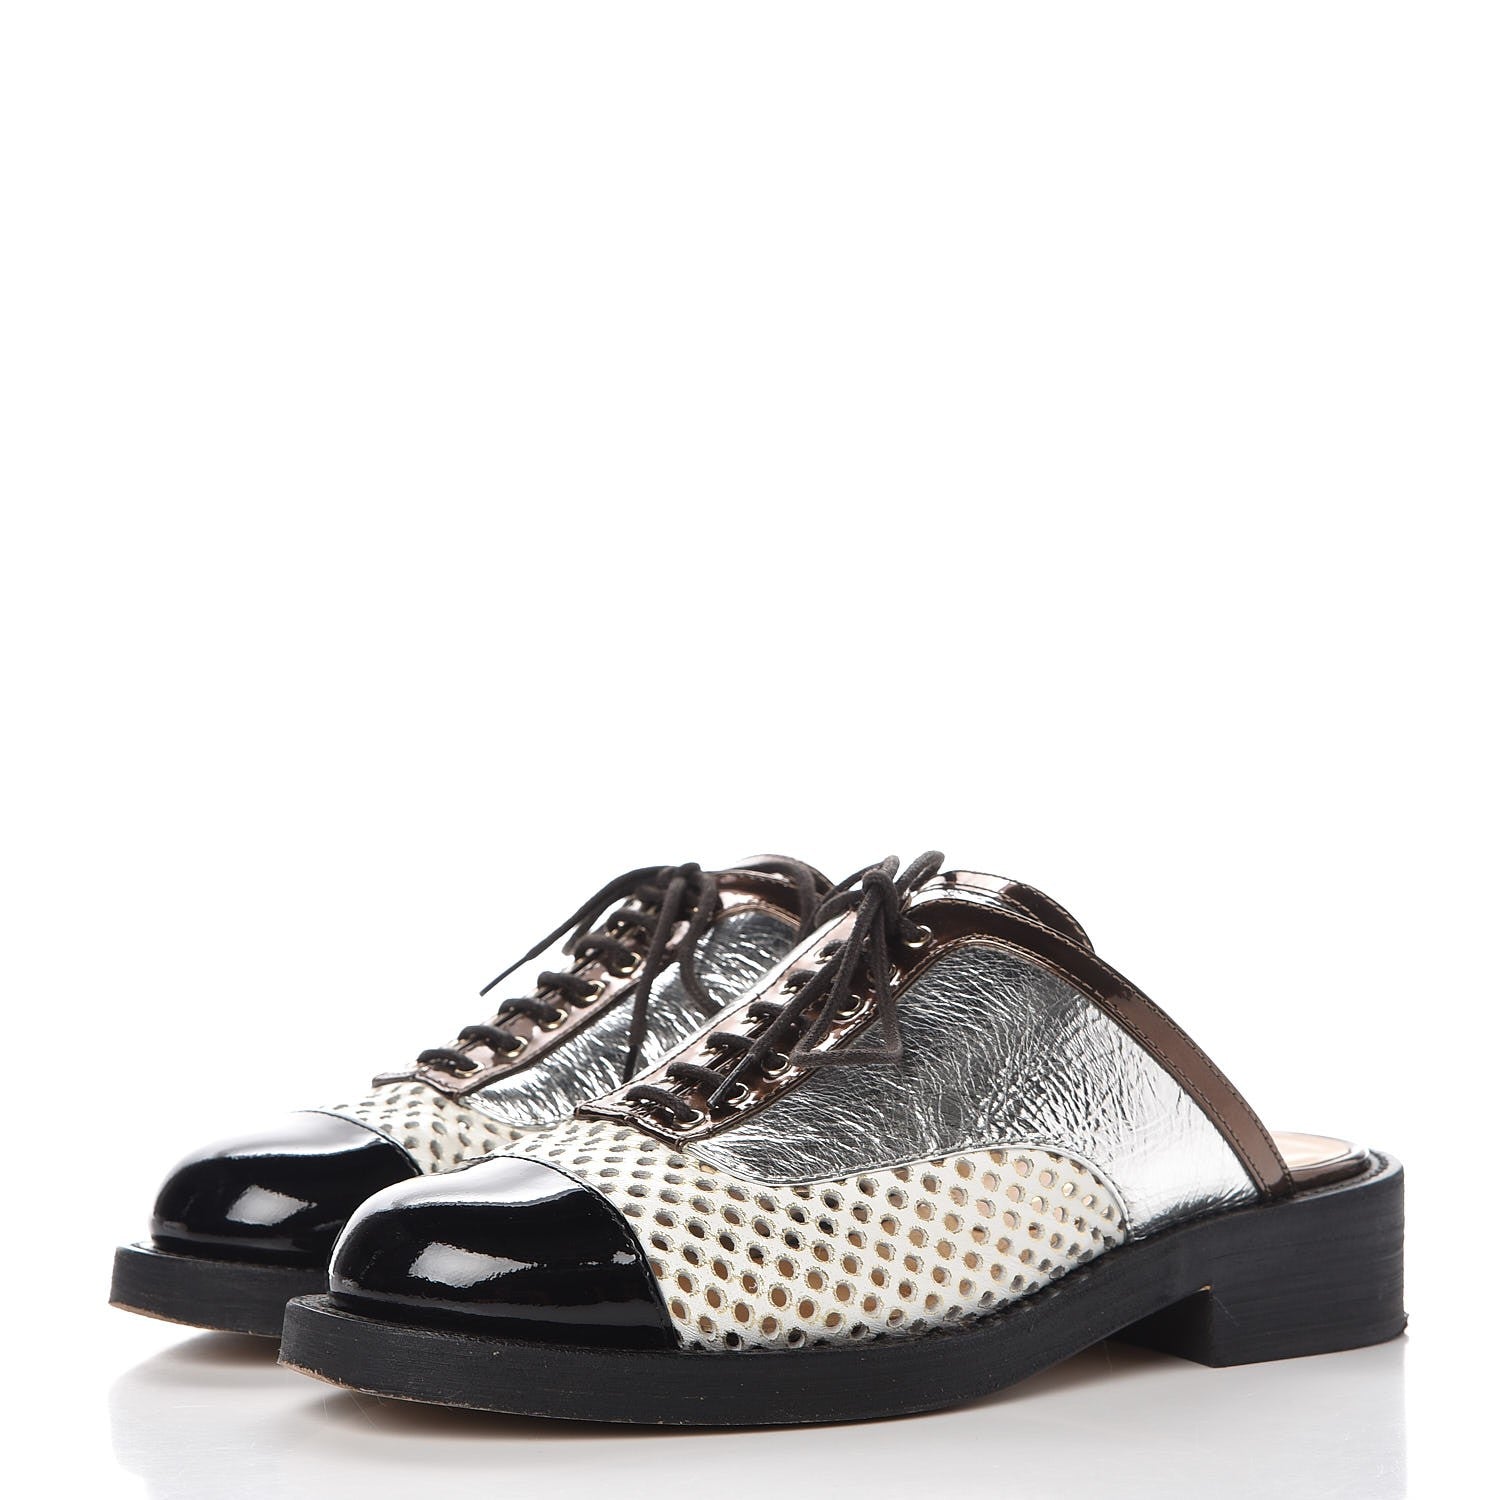 CHANEL PERFORATED LAMBSKIN LEATHER LACE-UP MULES